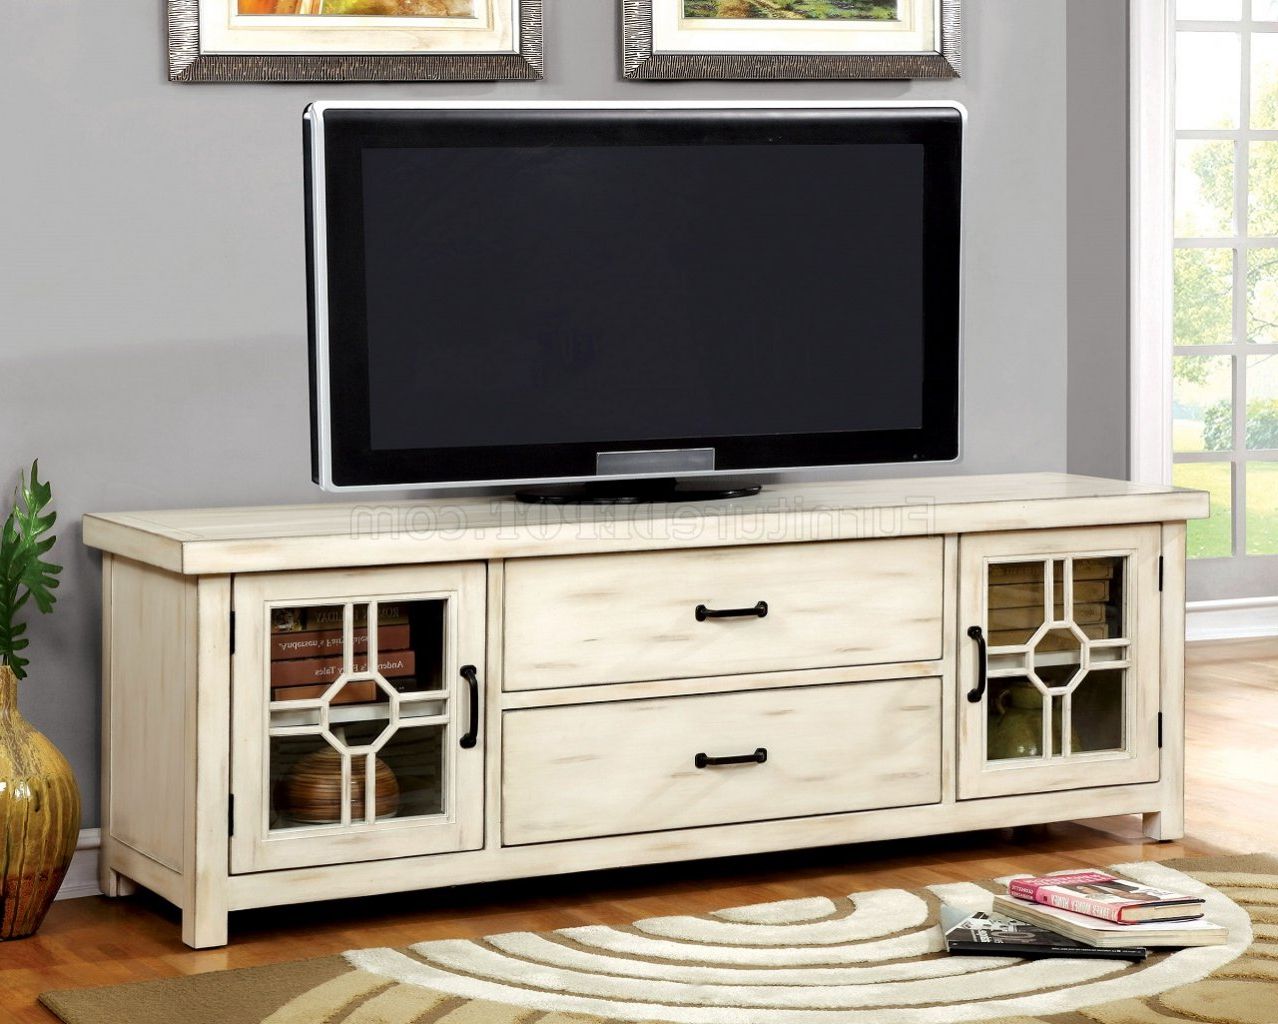 Ridley Cm5230 Tv Console In Antique Style White W/optional Within Alden Design Wooden Tv Stands With Storage Cabinet Espresso (Gallery 4 of 20)